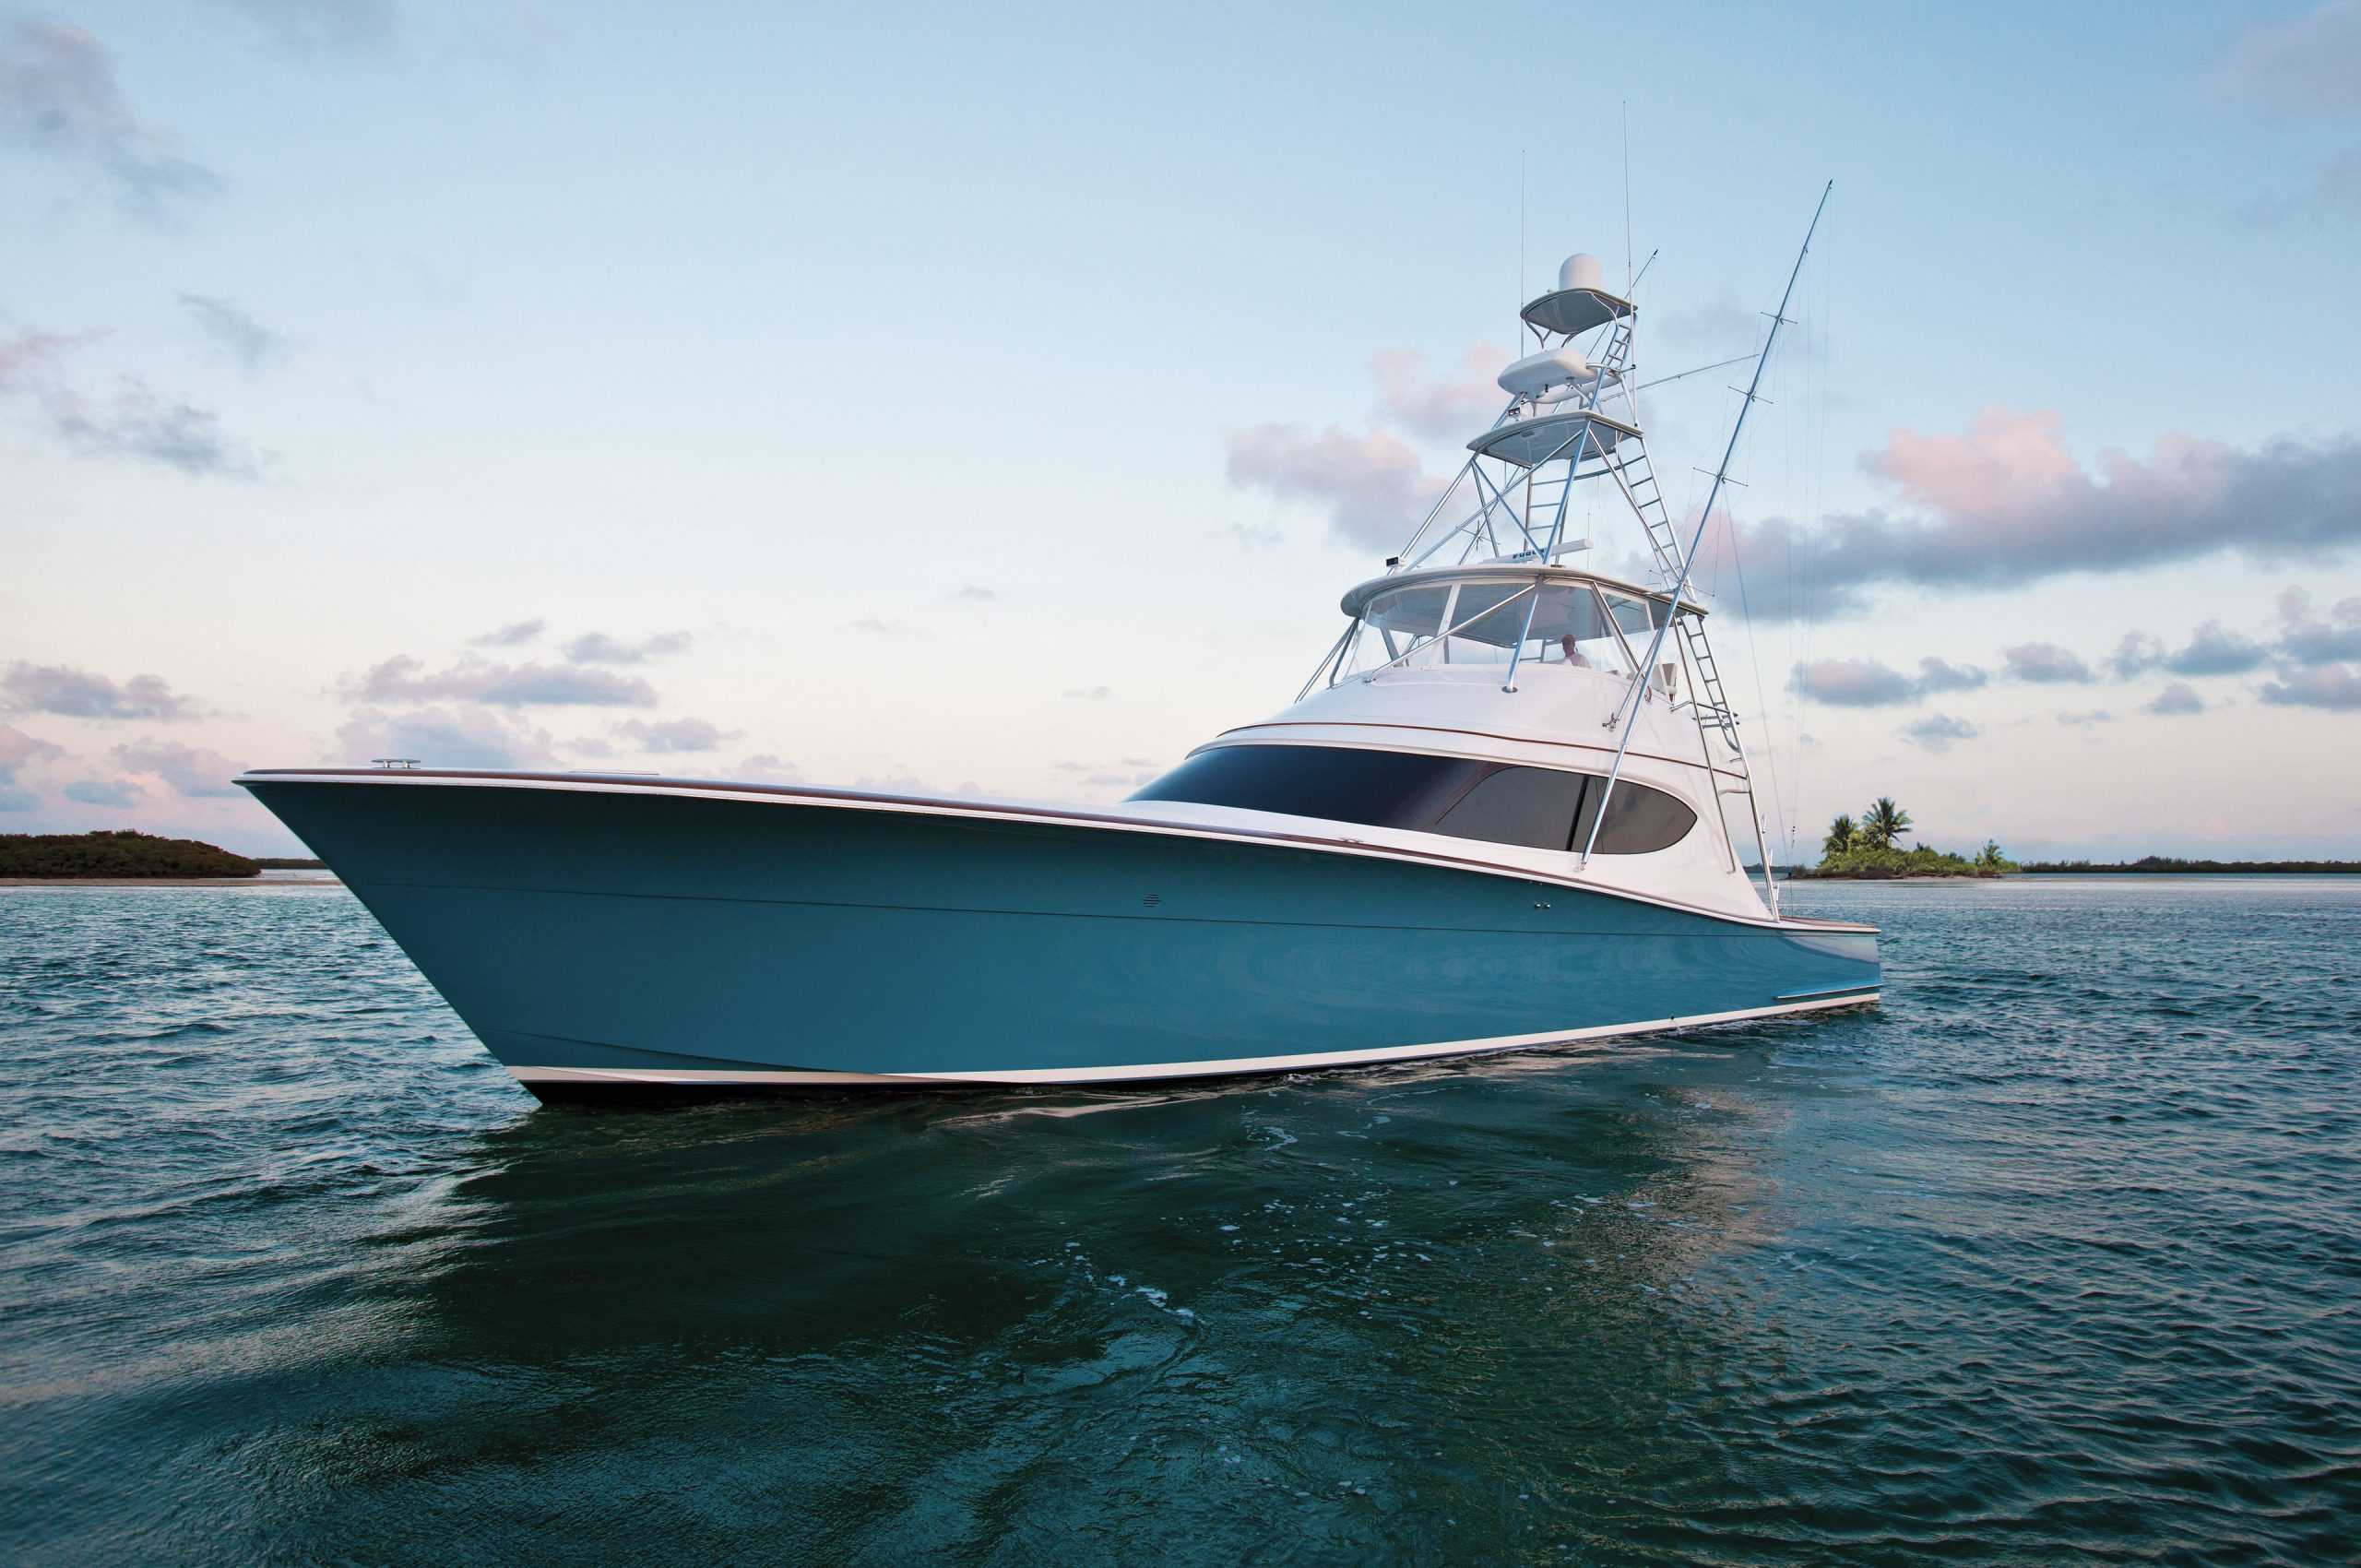 50 of the Top Saltwater Fishing Boats For Sale in Ocean City - Seamagazine